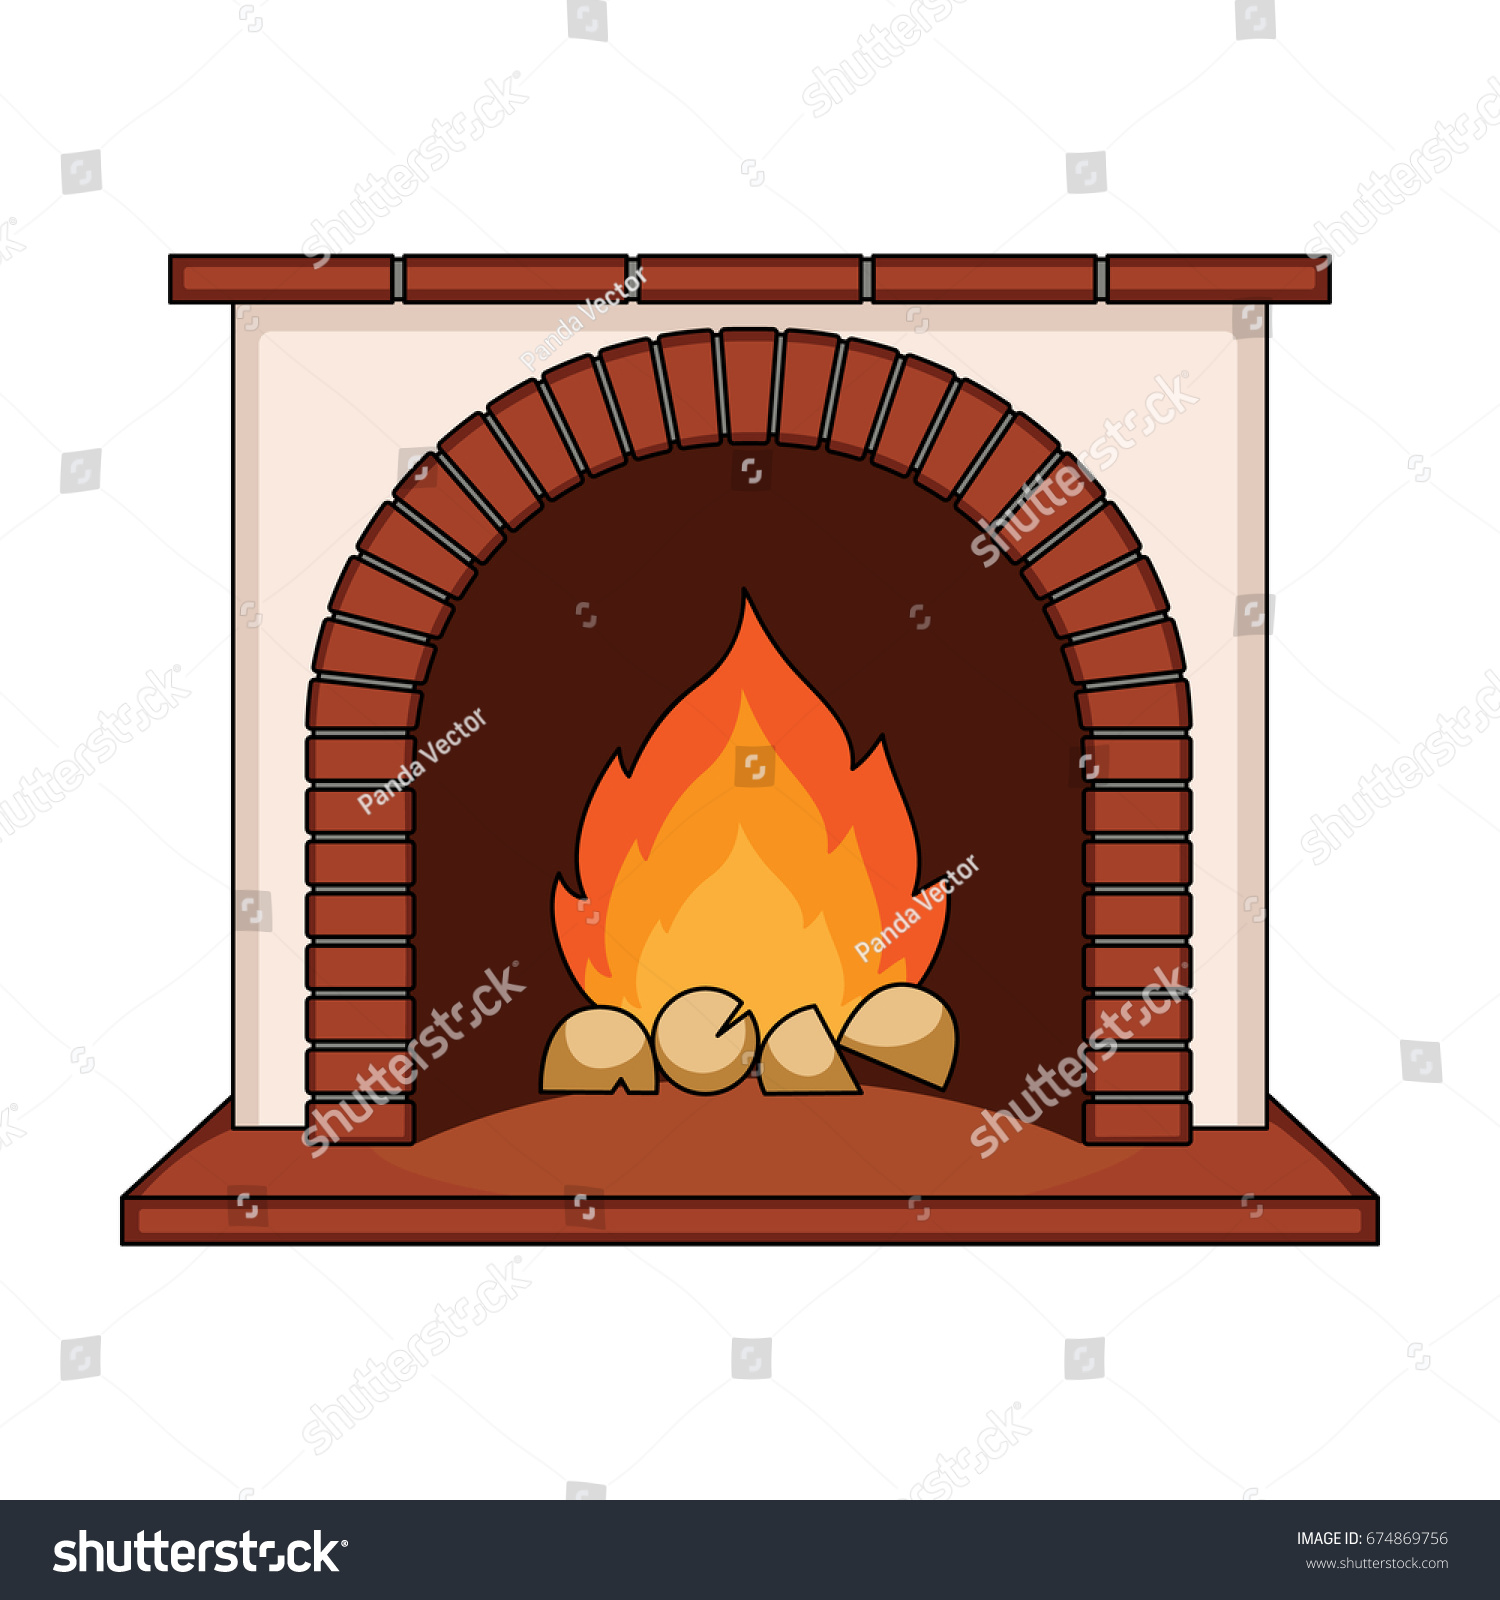 Fire Warmth Comfort Fireplace Single Icon Stock Photo (Photo, Vector ...